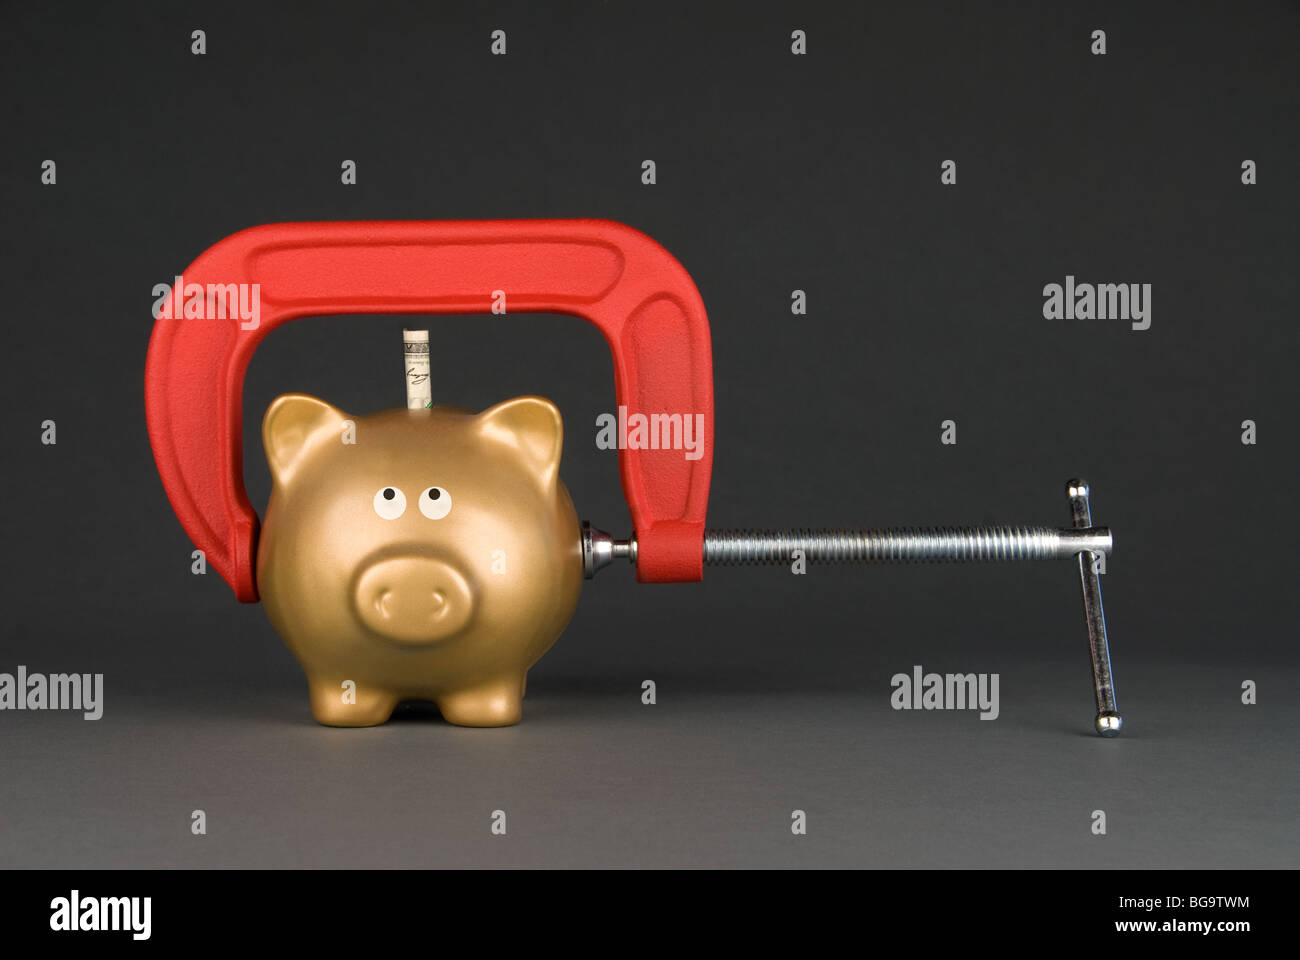 A golden piggy bank is being squeezed for its last dollar. Image can be used for many financial inferences. Stock Photo